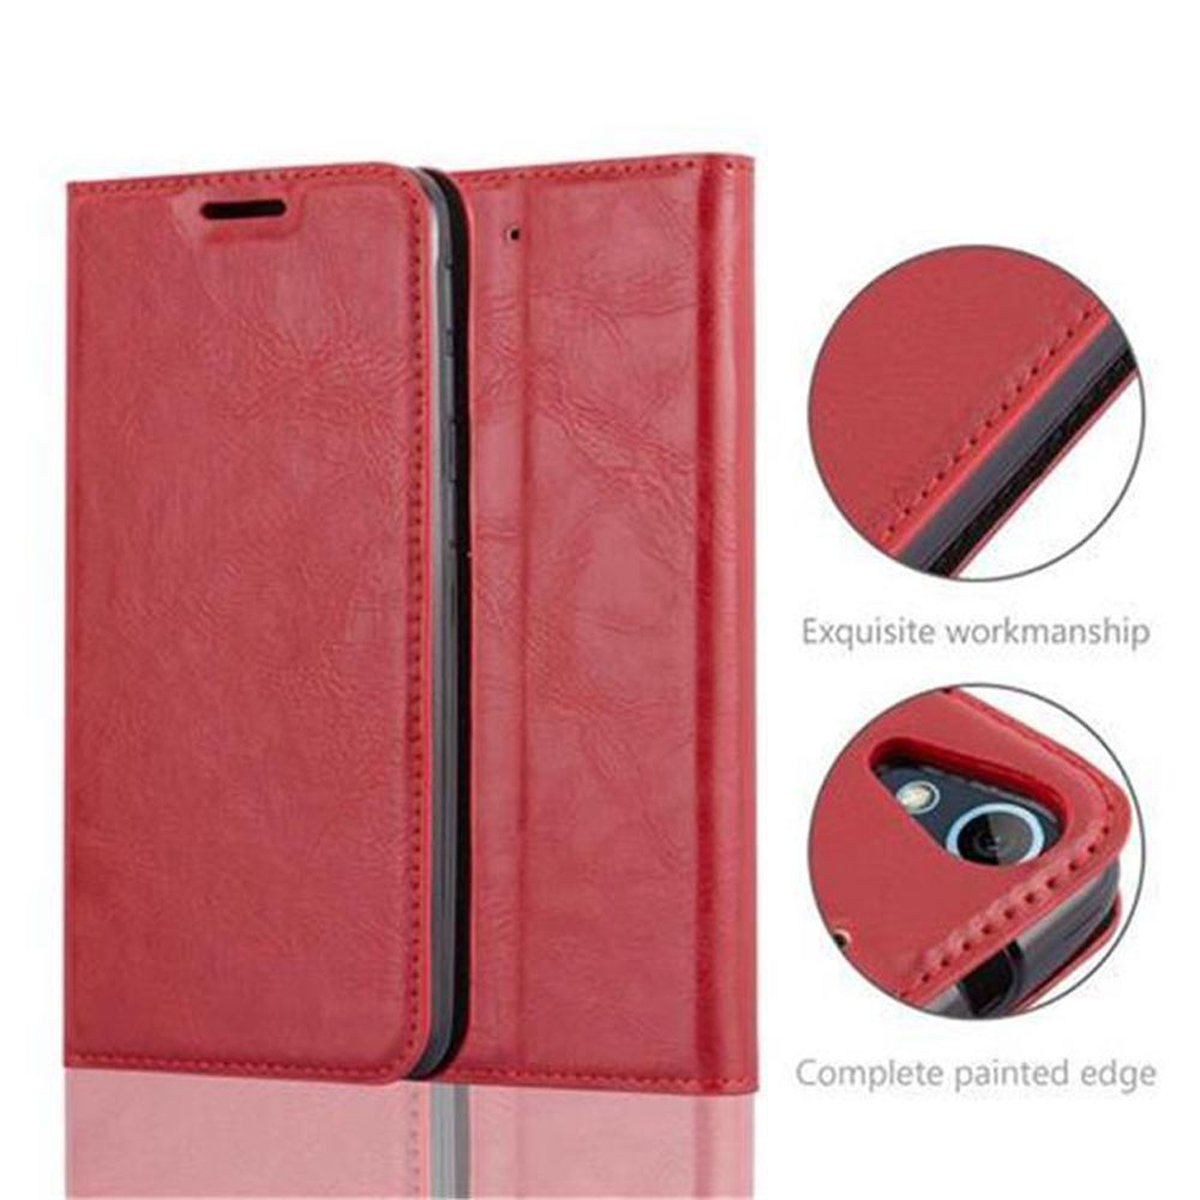 Bookcover, Book Magnet, Desire Invisible APFEL CADORABO ROT Hülle 626G, HTC,